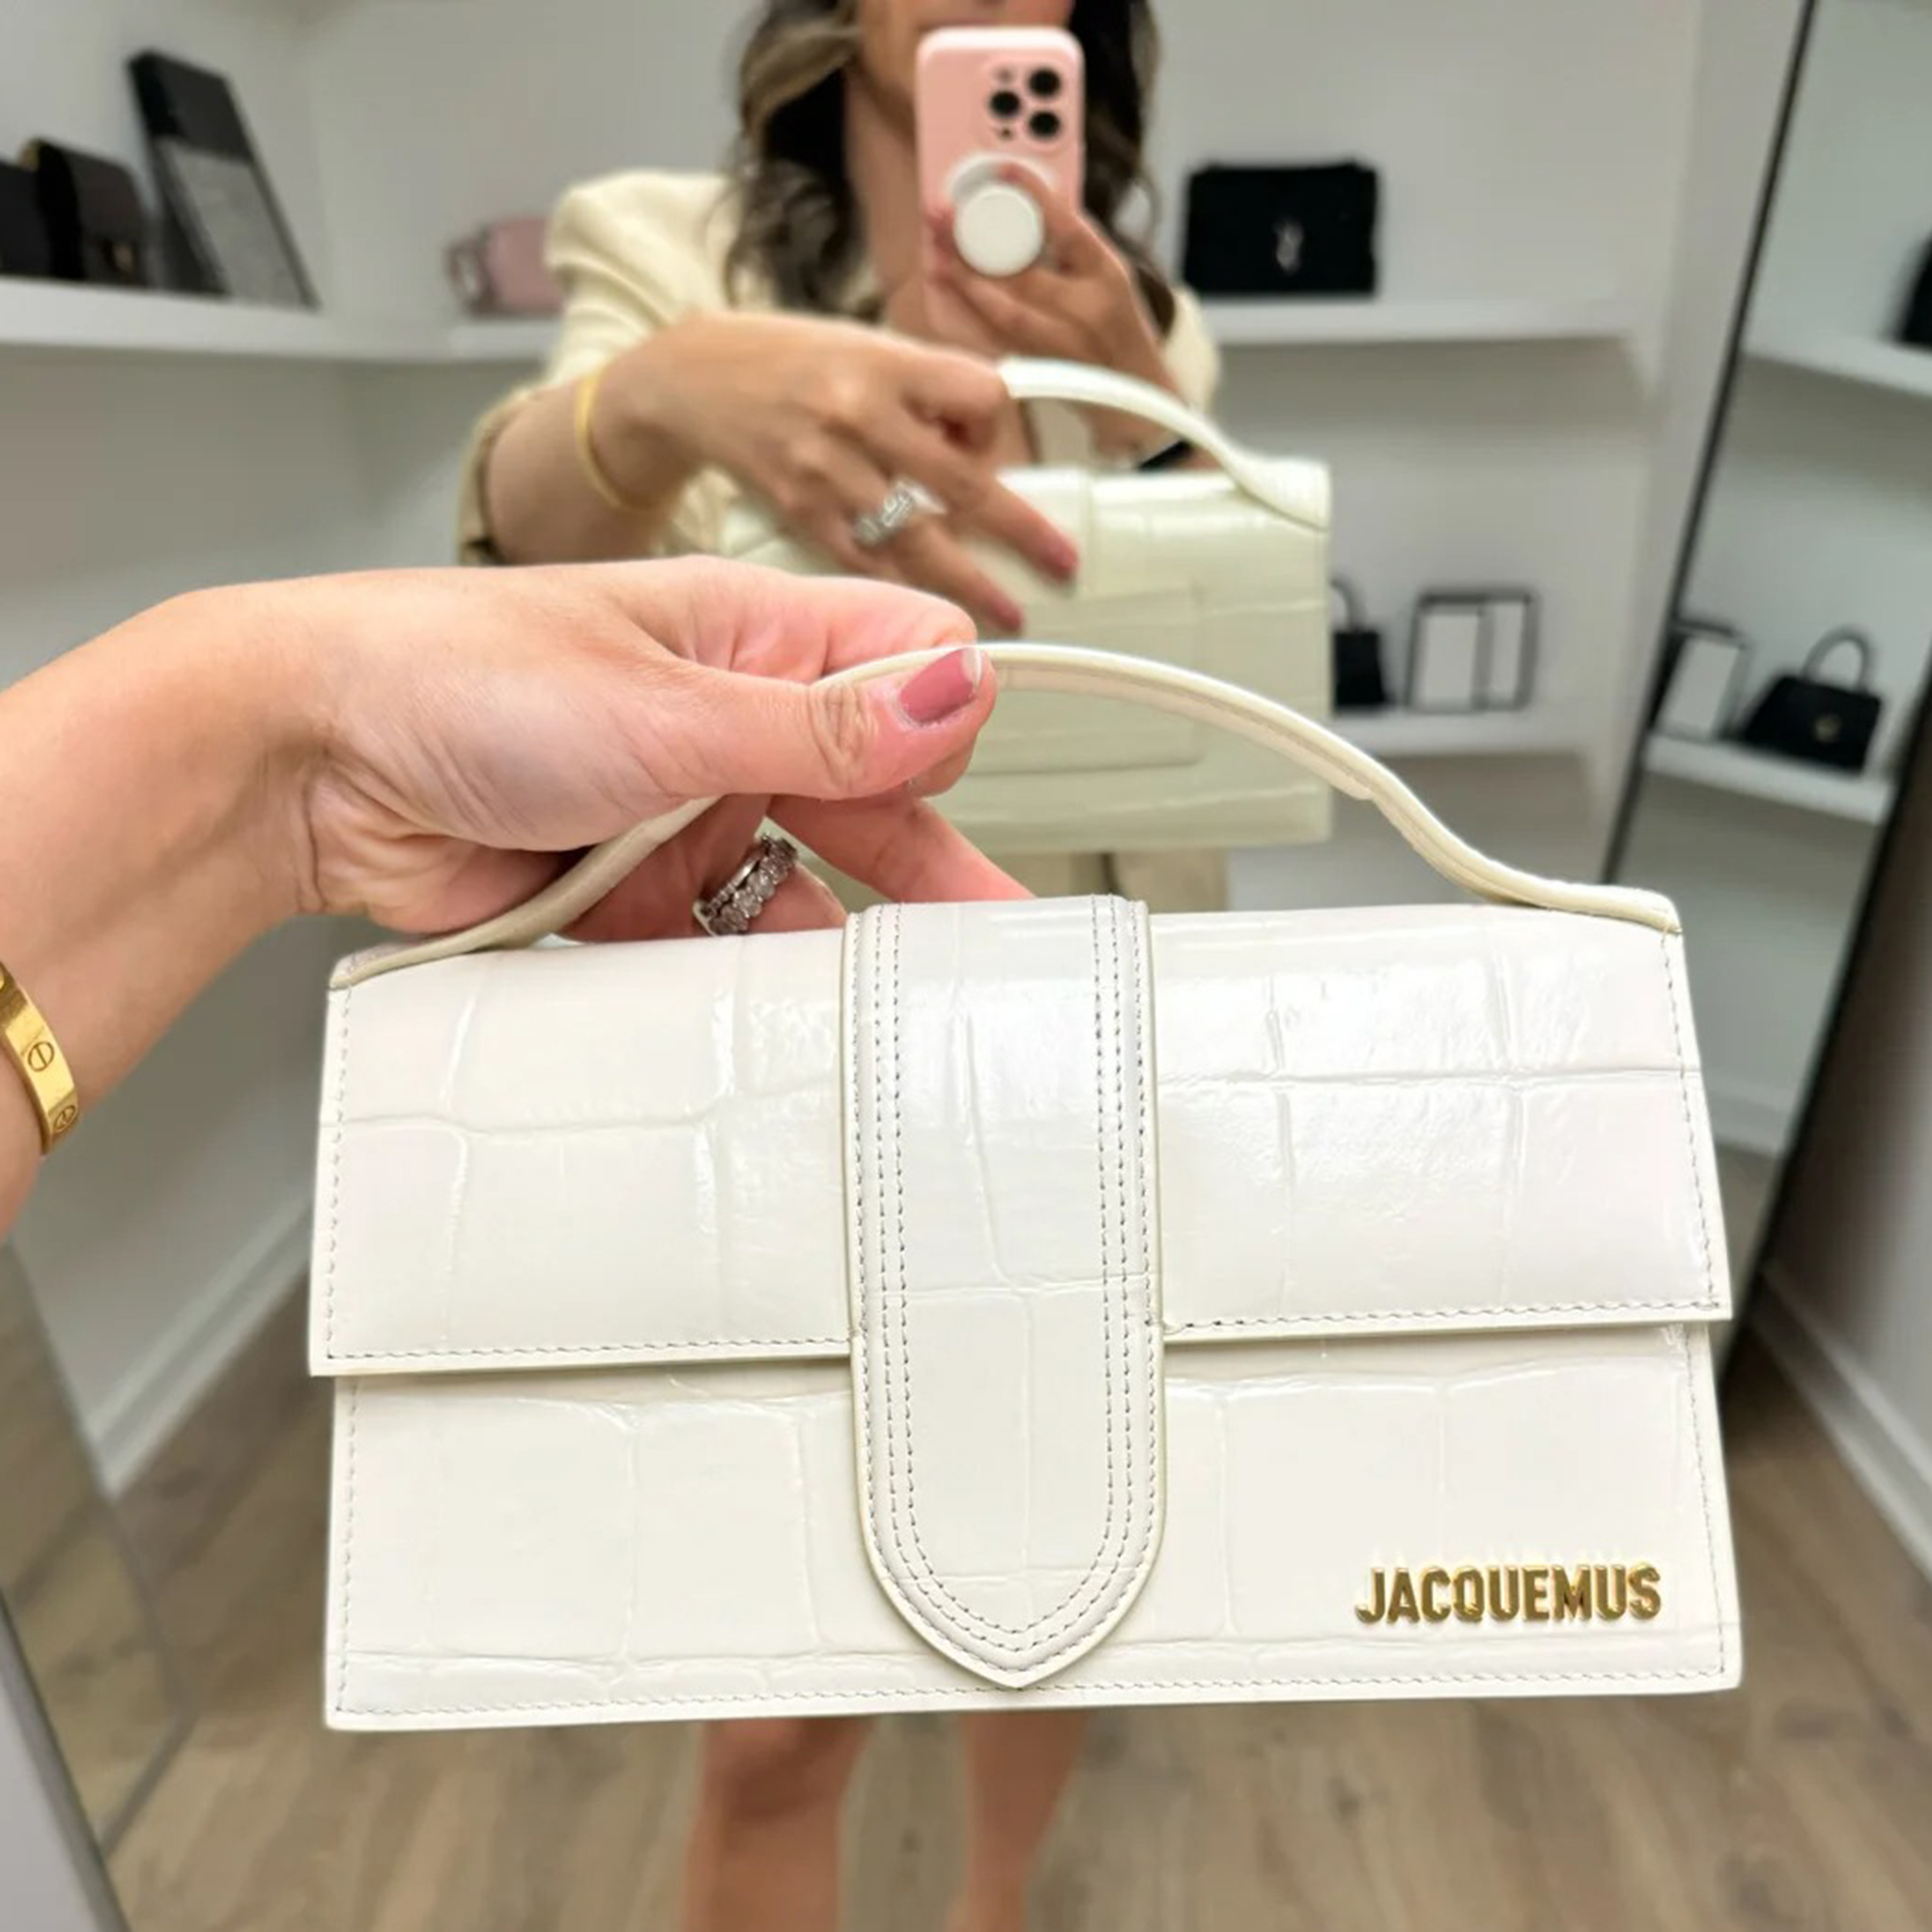 Jacquemus off-white croc embossed leather le grand bambino bag